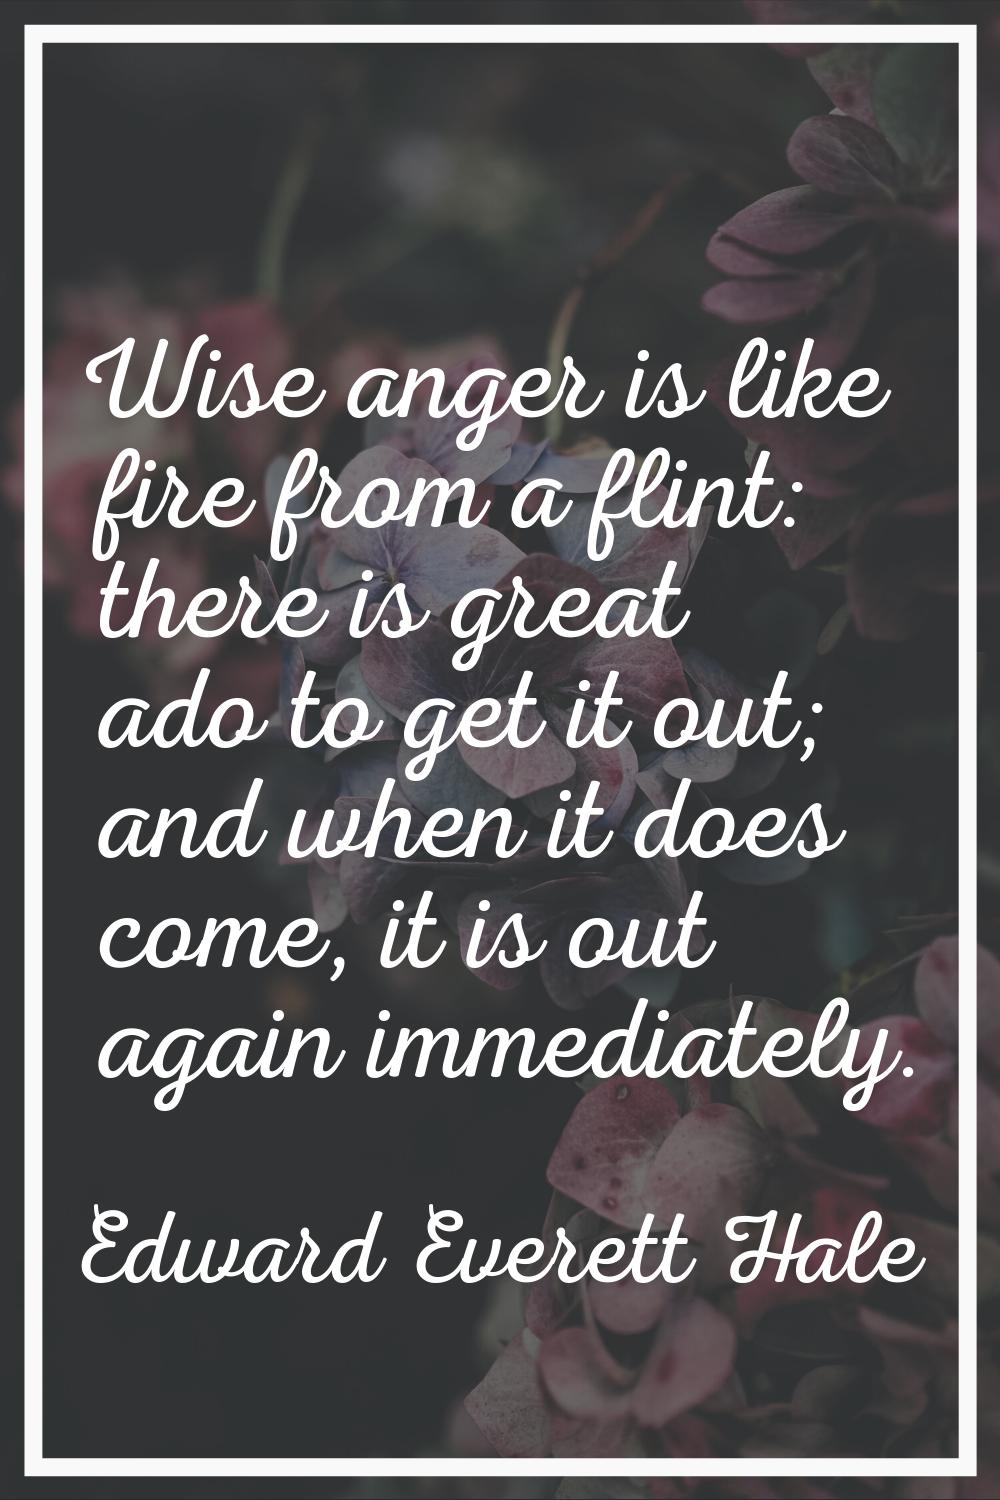 Wise anger is like fire from a flint: there is great ado to get it out; and when it does come, it i